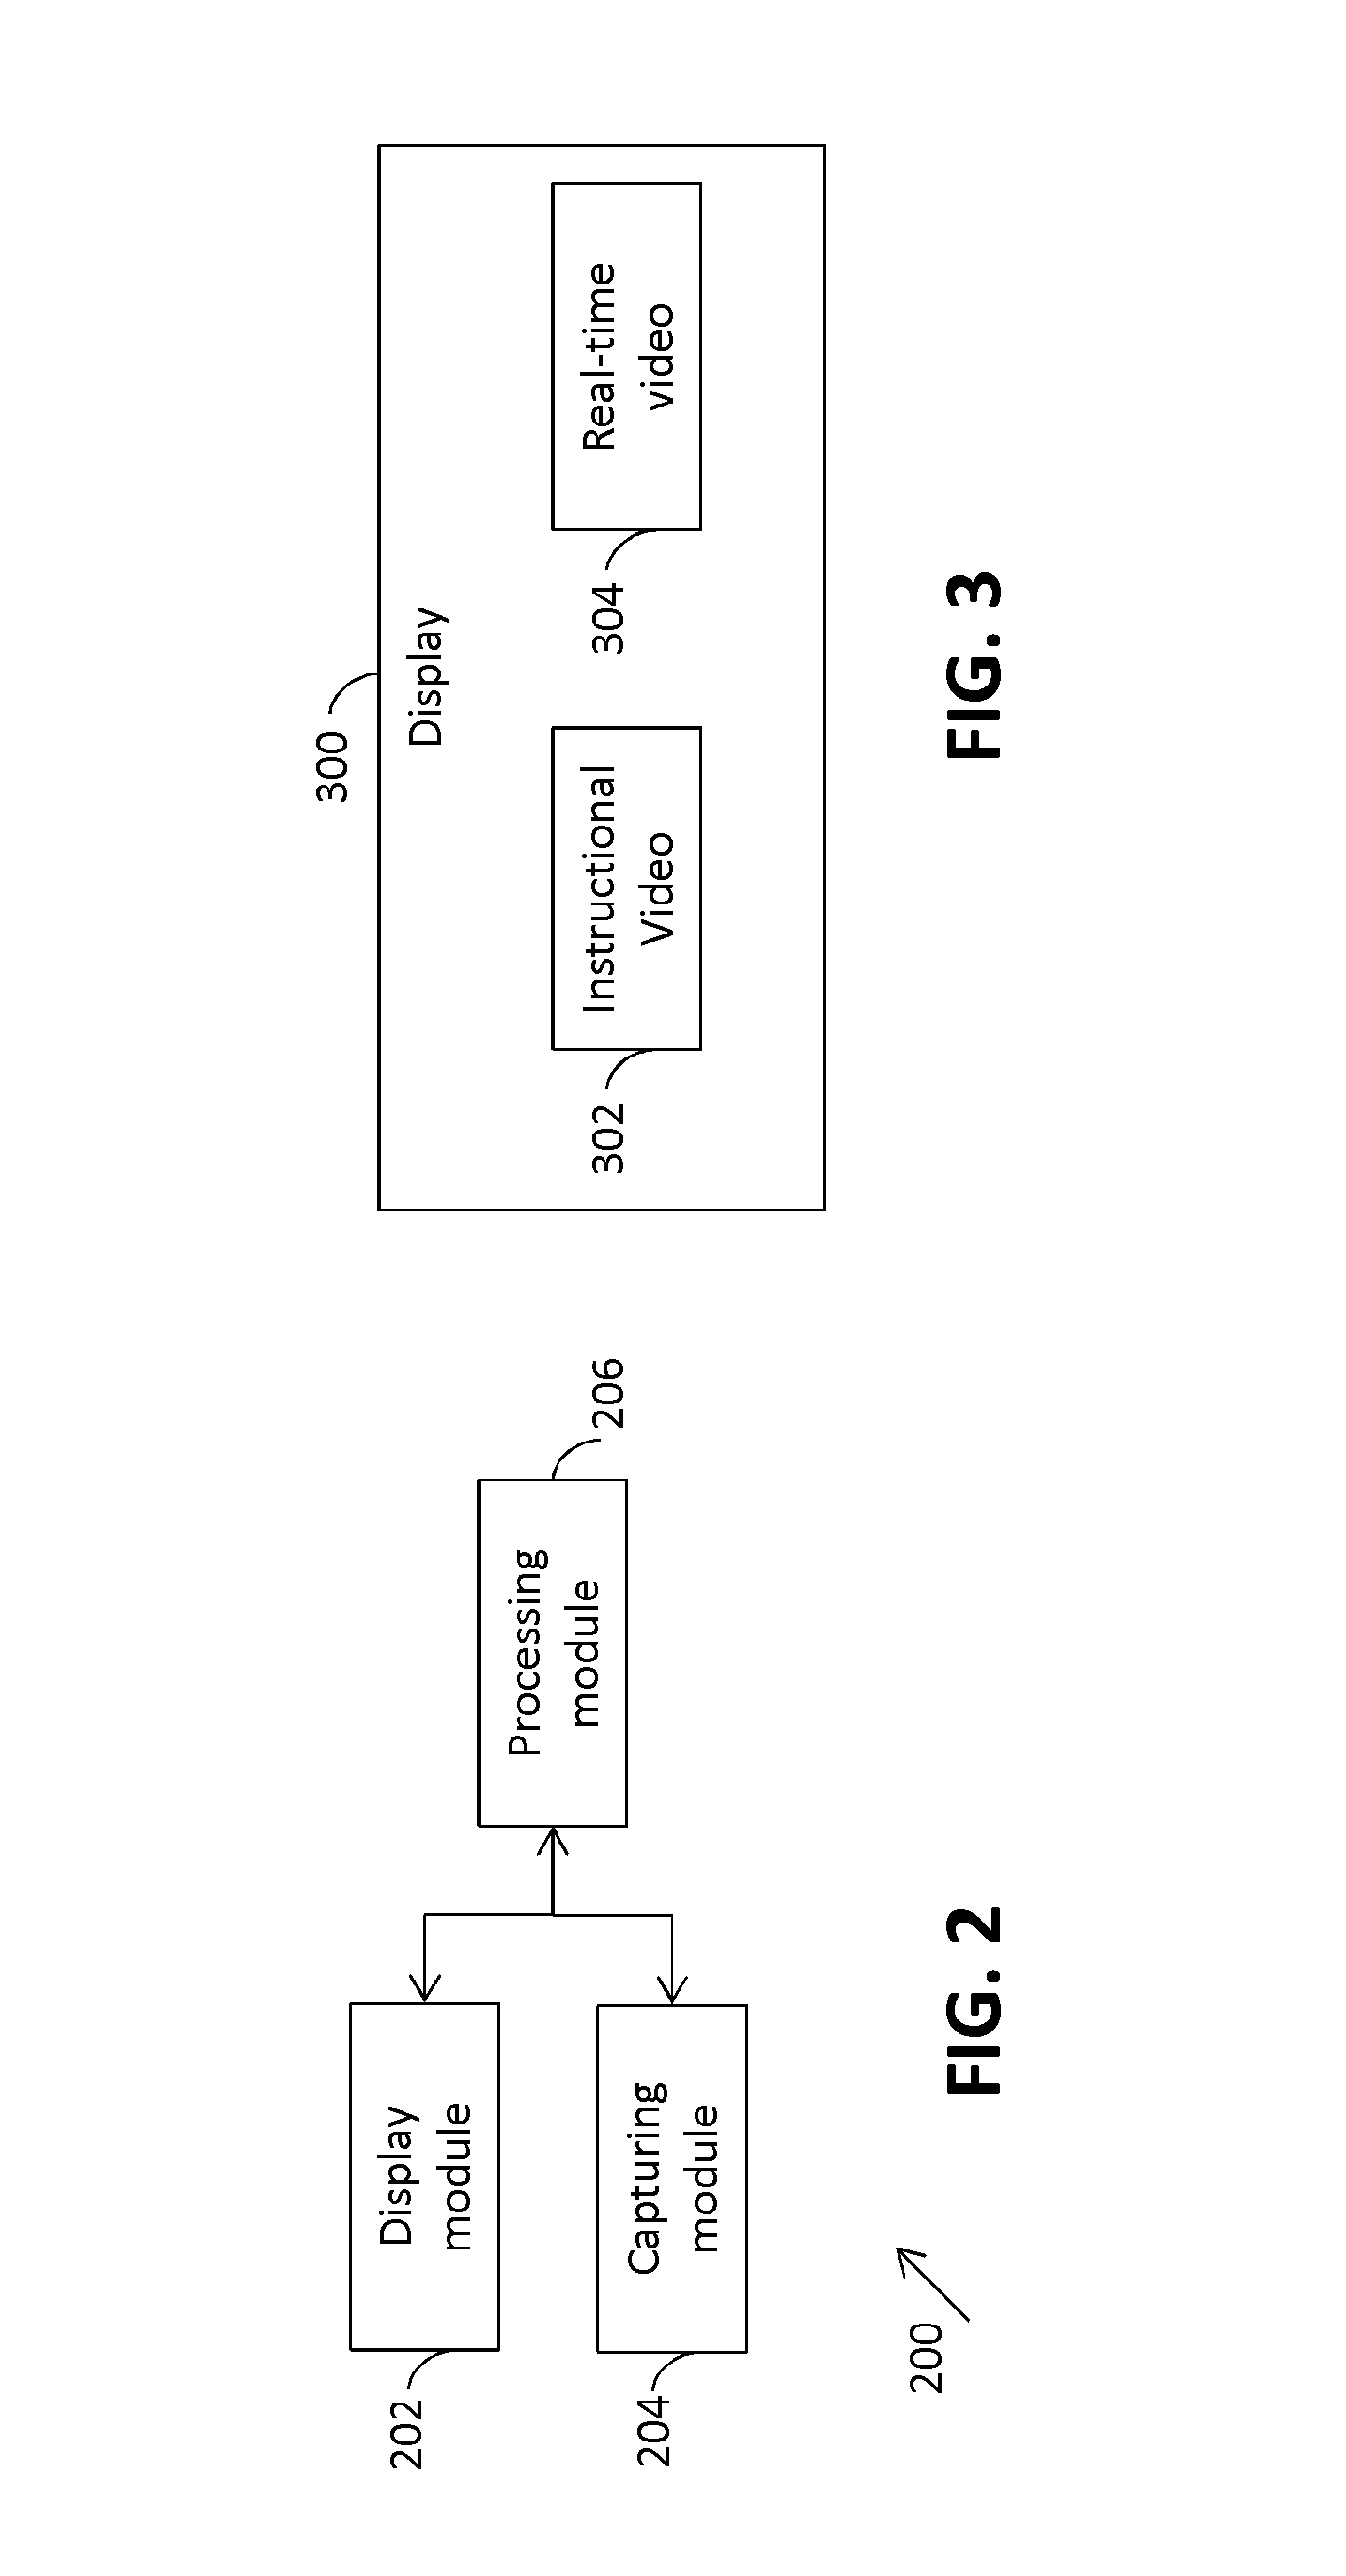 System and method for providing real-time guidance to a user